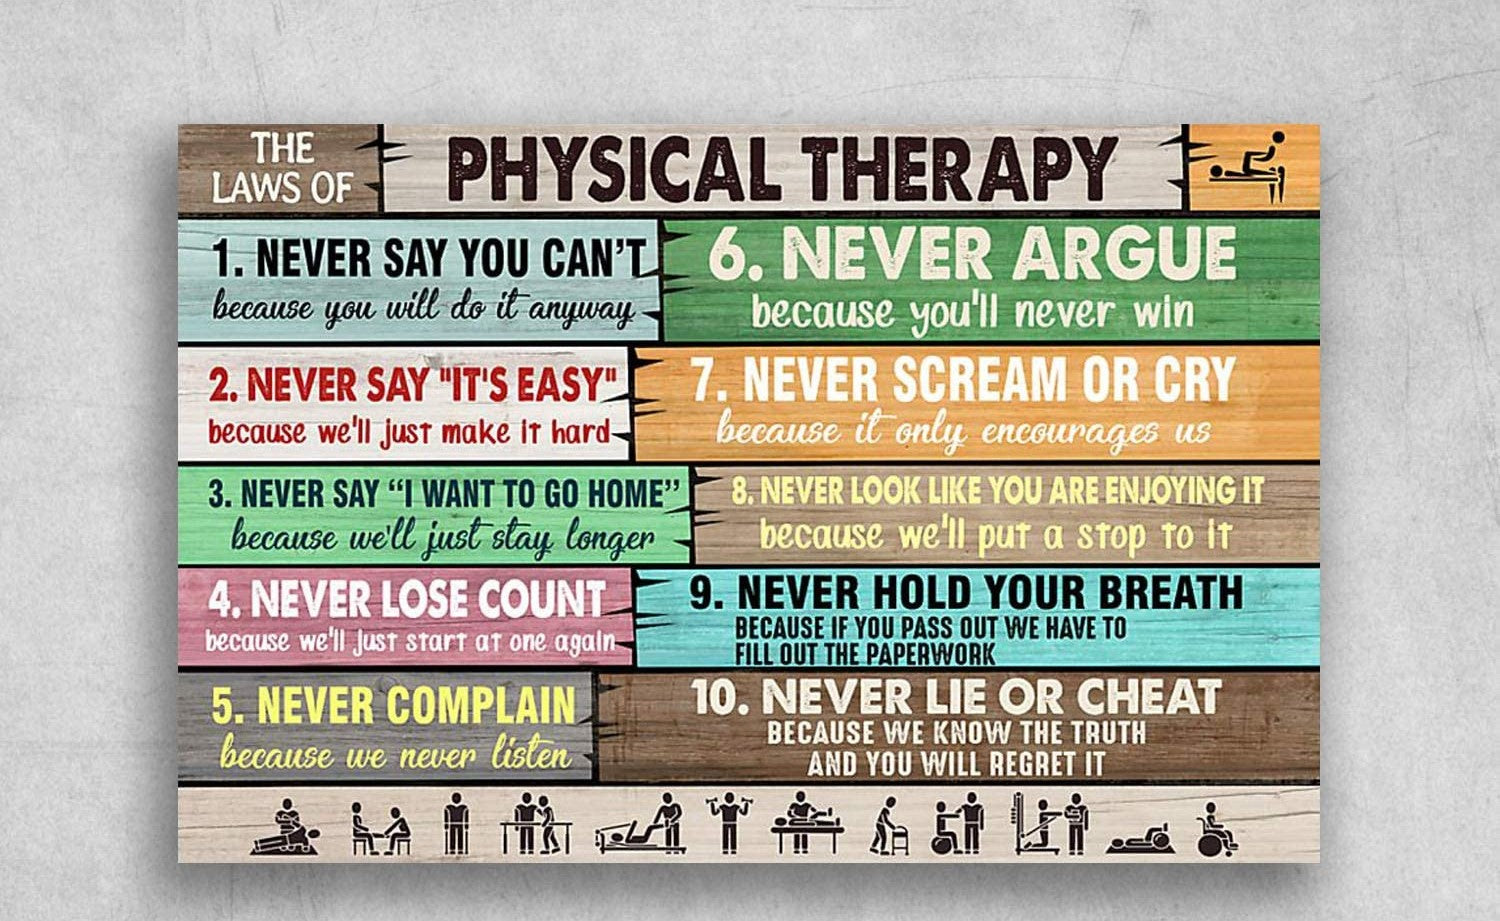 The Laws Of Physical Therapy Never Say You Cant Because You Will Do It Anyway